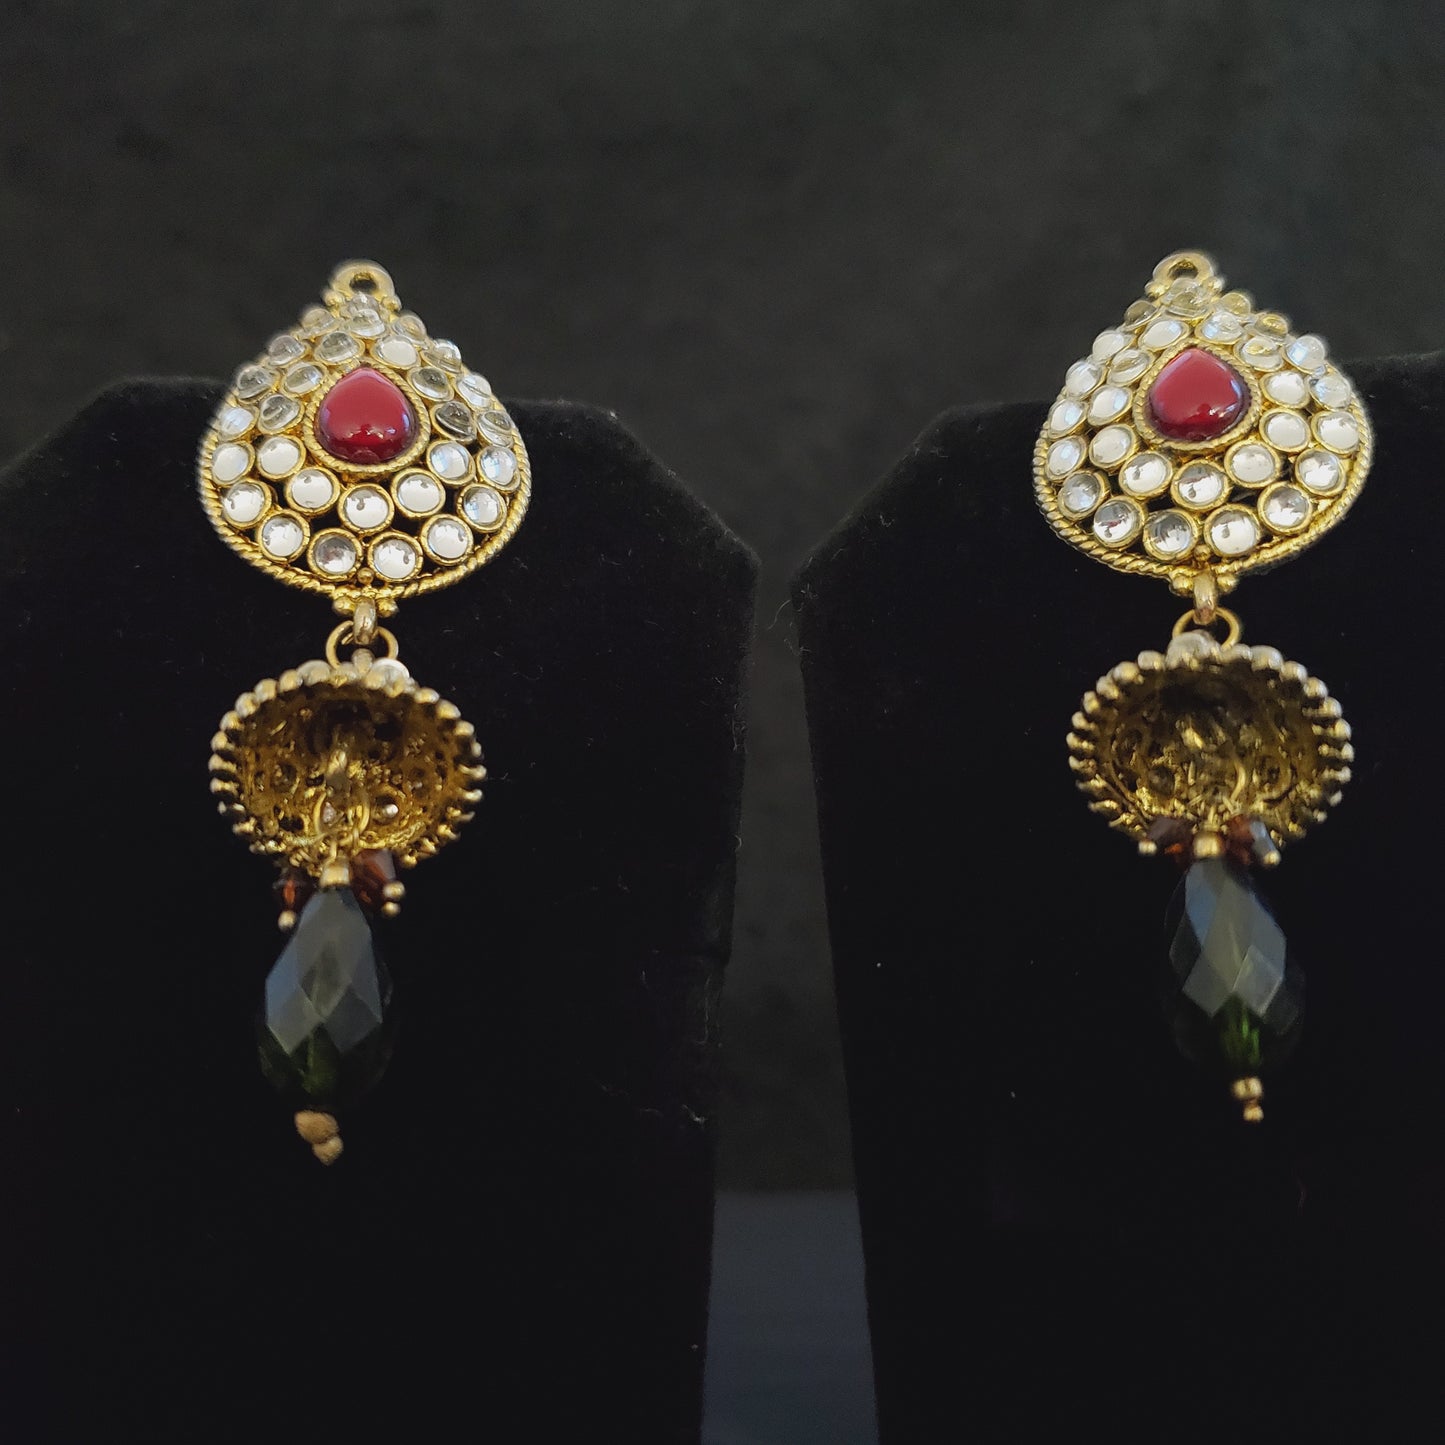 Rani Red and White Kundan Earrings with Green Stones